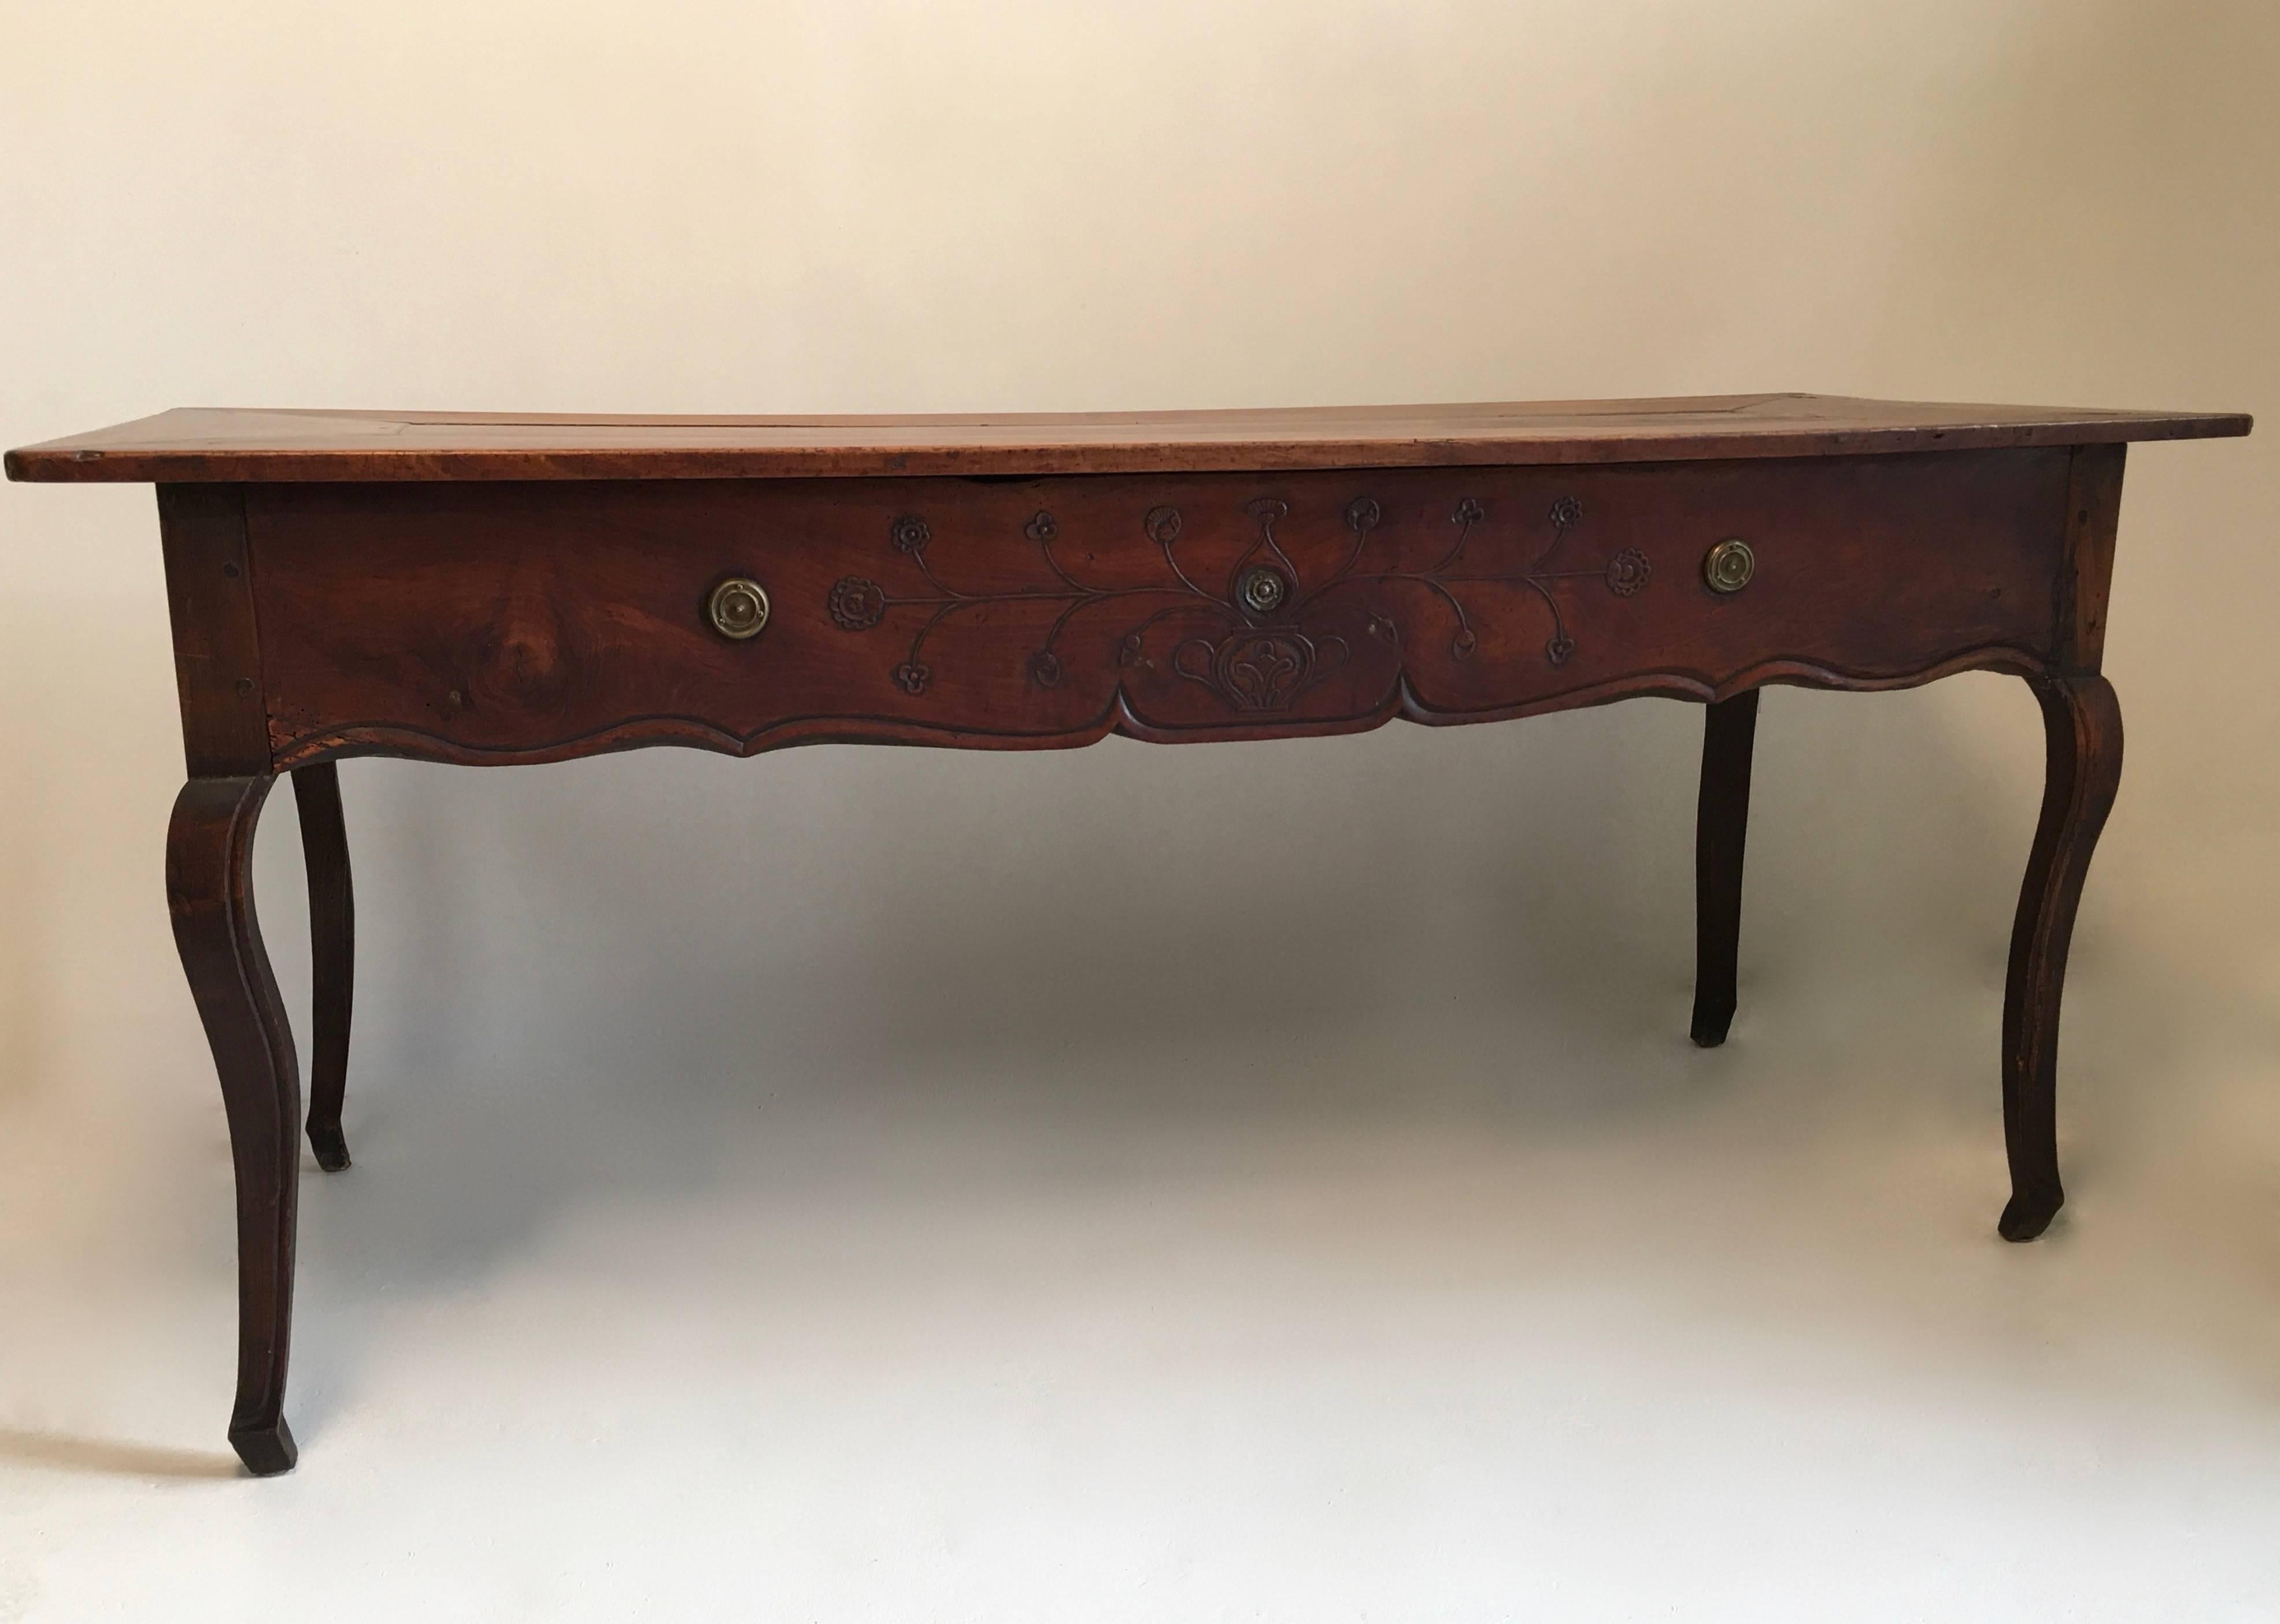 Hand-Carved Large French Country Style Walnut Desk or Table, 18th Century